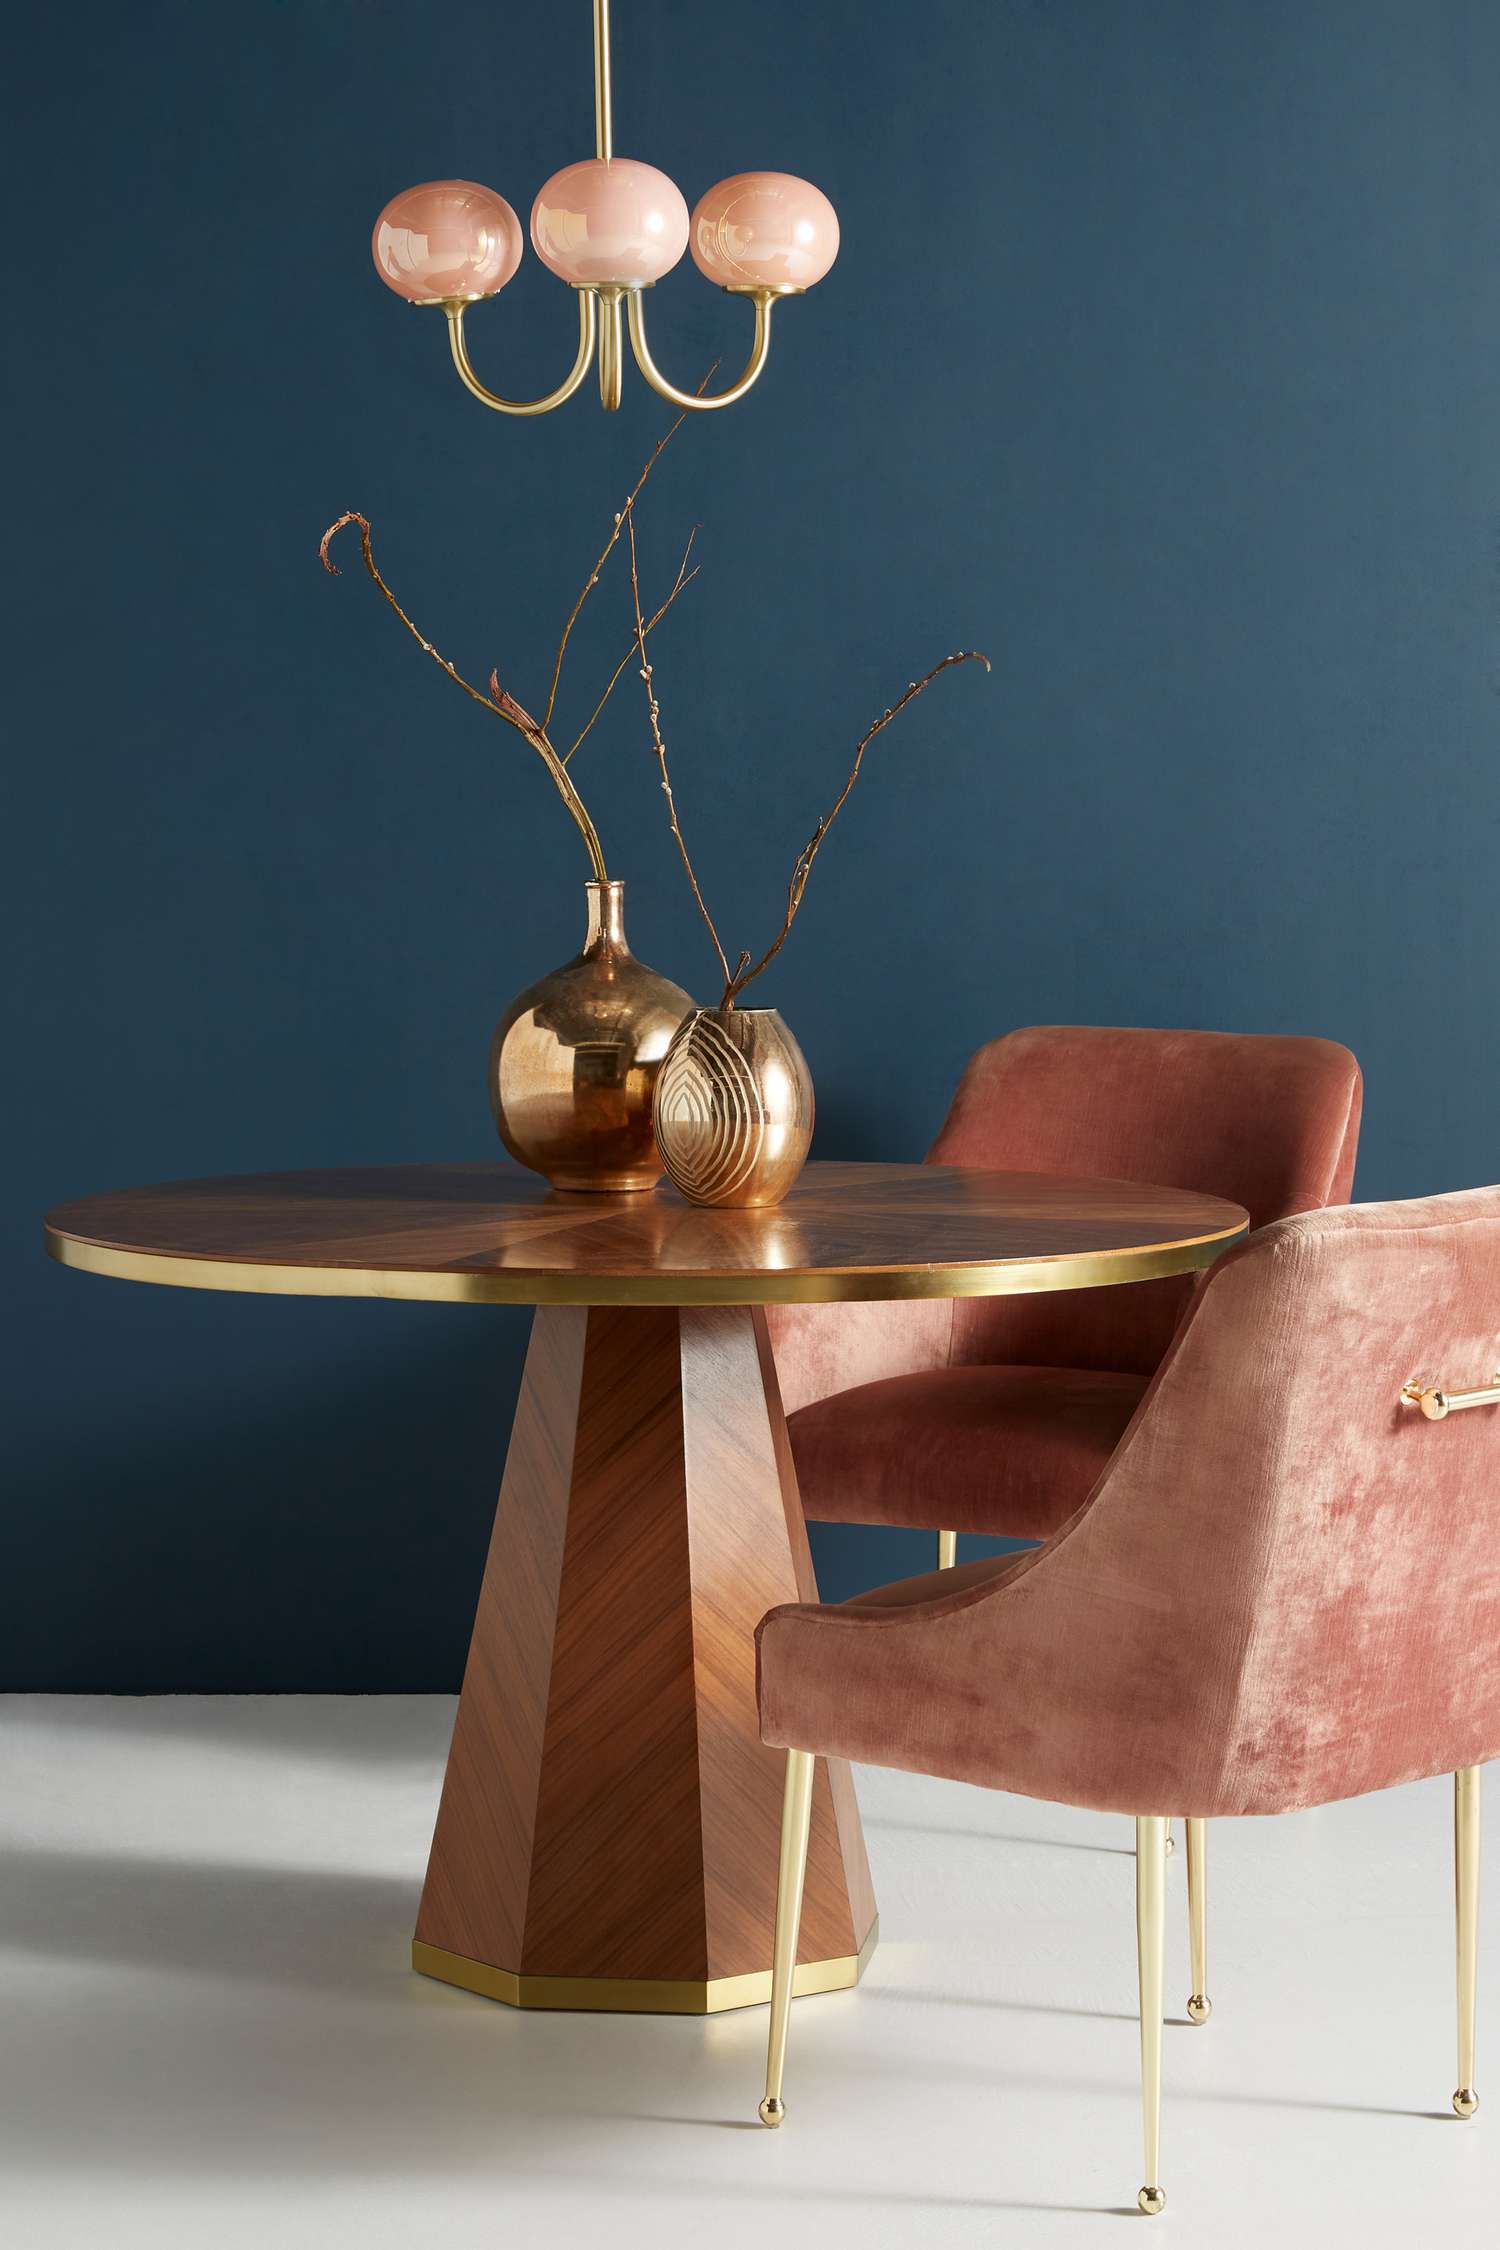 gold and wood dining table in dark blue room